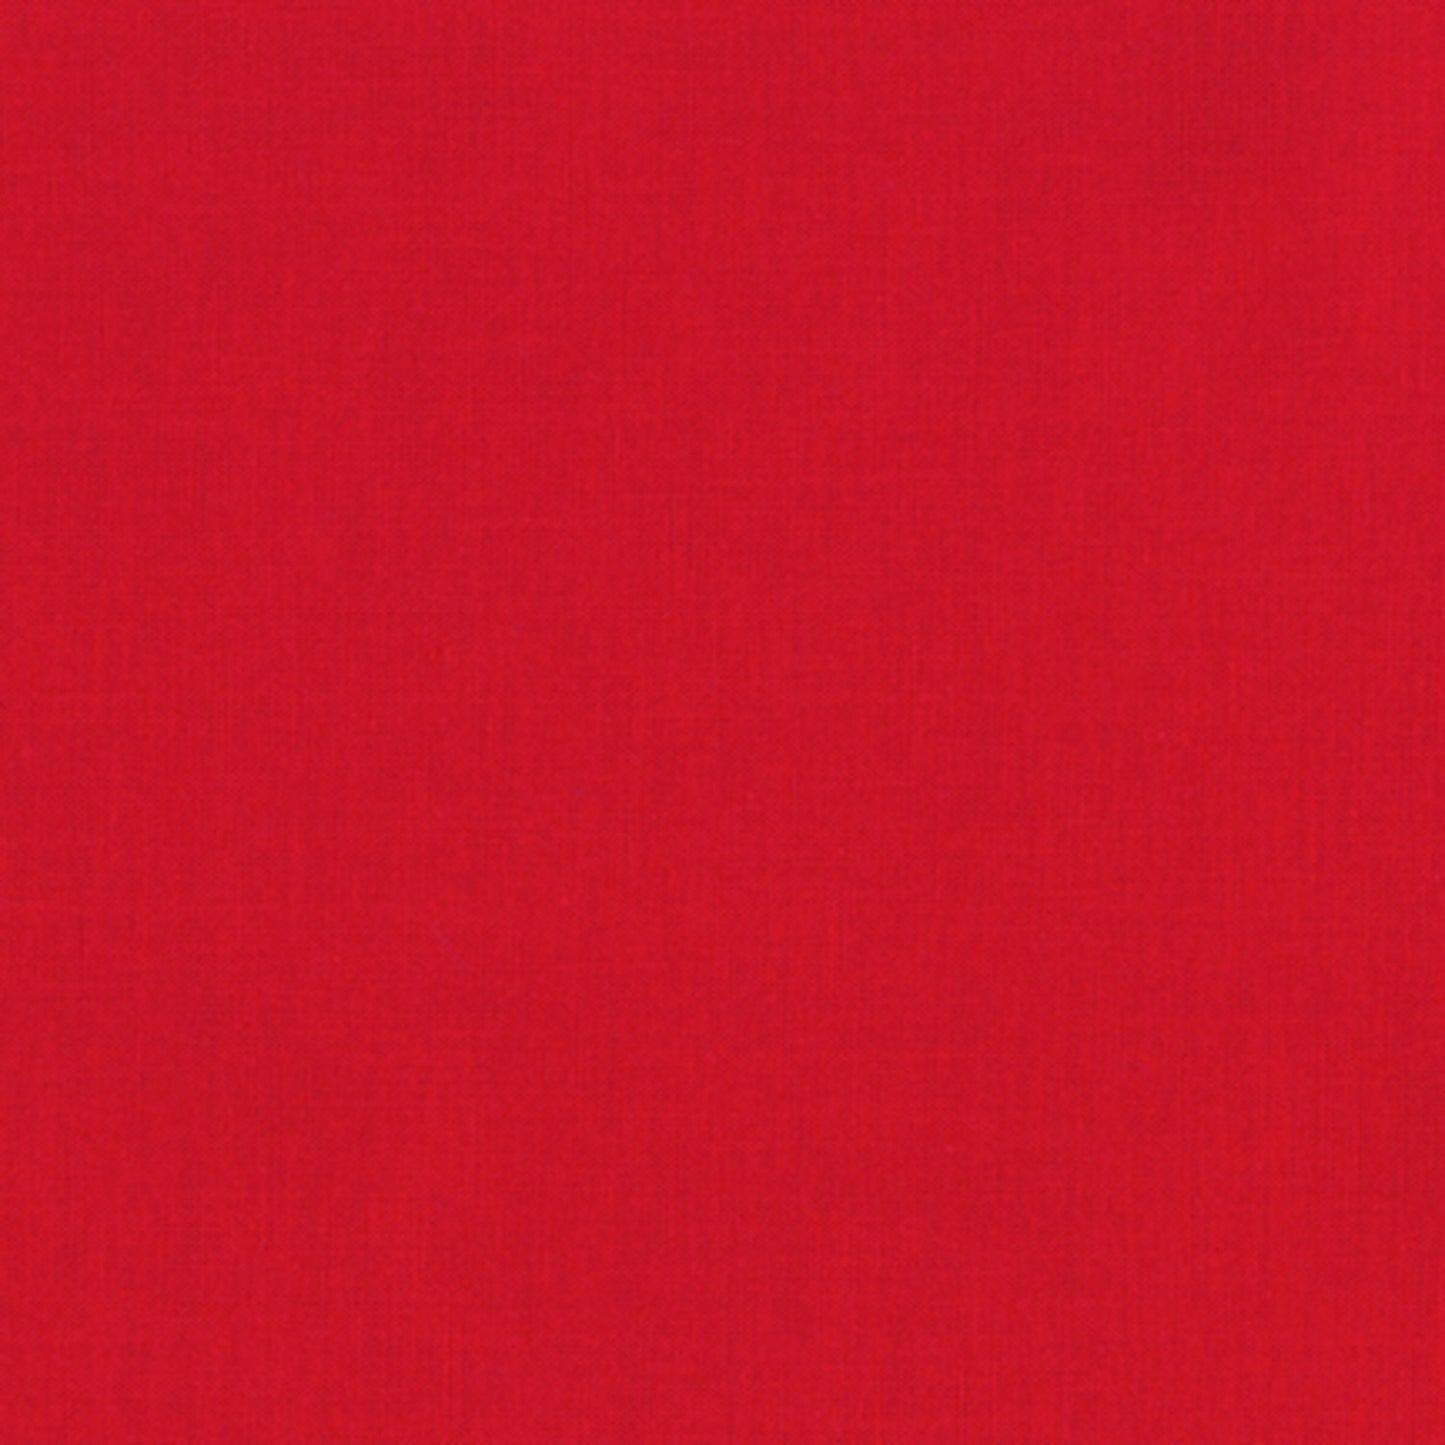 Kona Solids || Red || Cotton Quilting Fabric